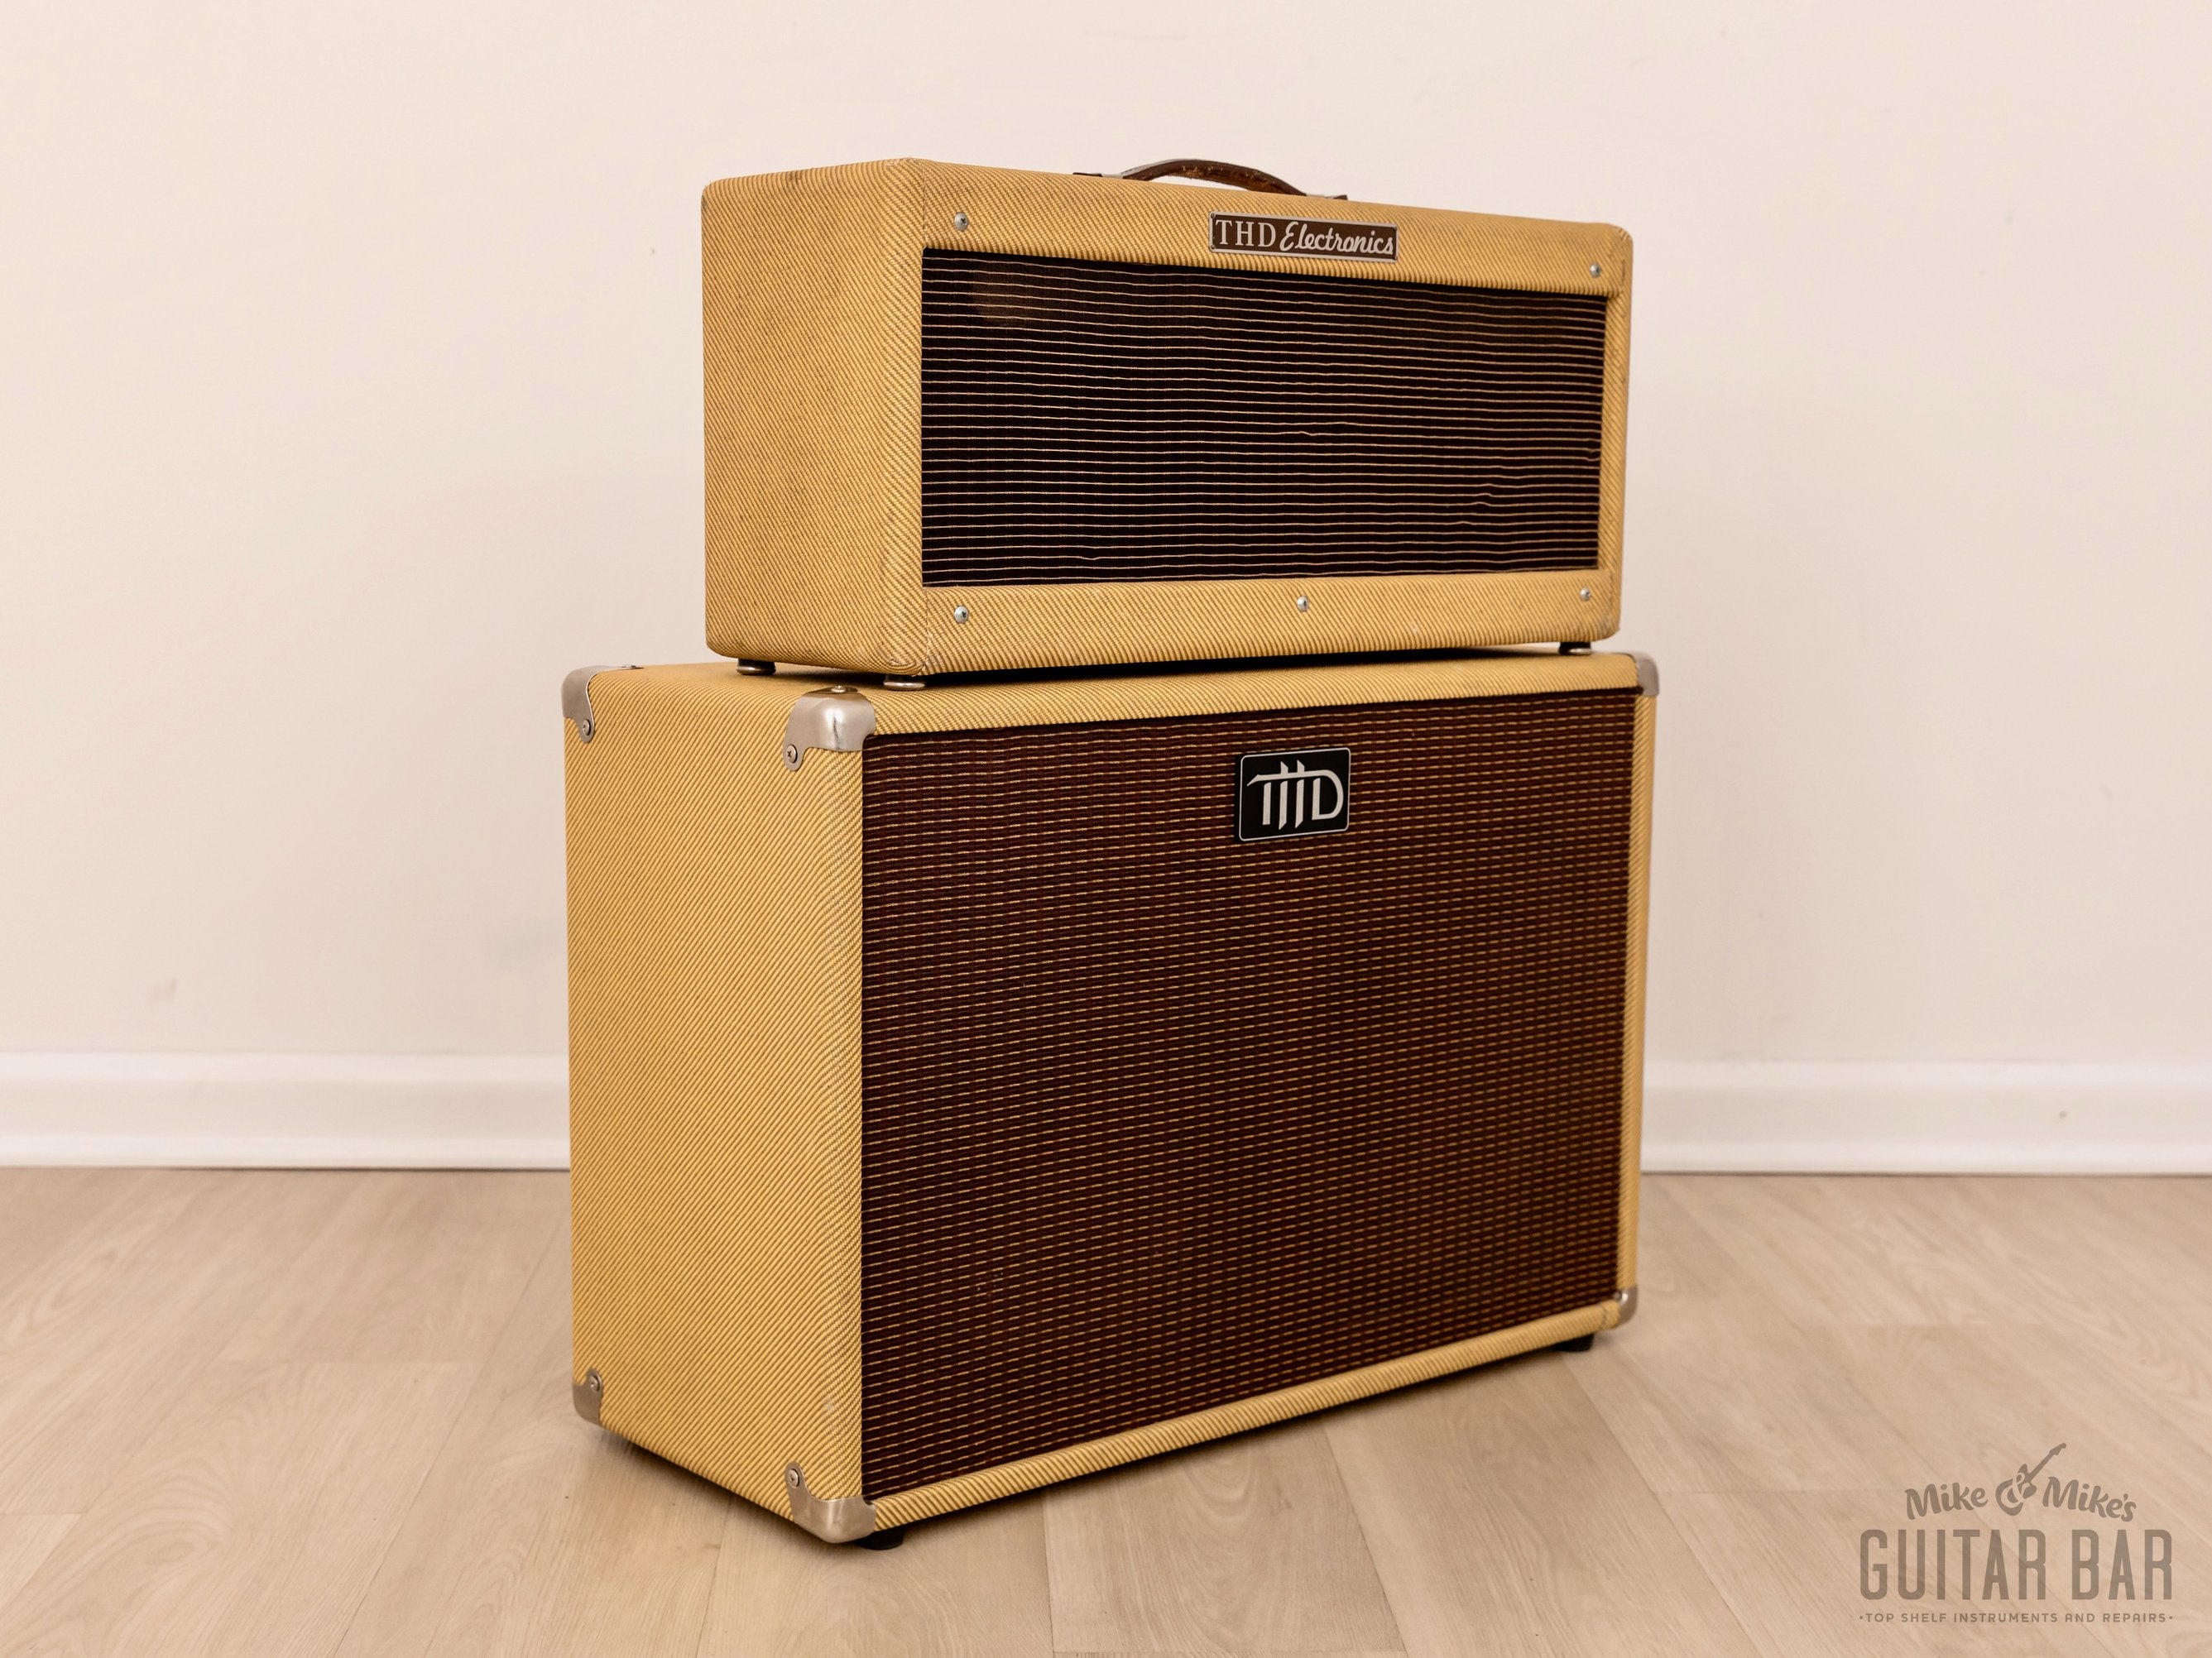 1989 THD Plexi 50 Boutique Tube Amp Head & 2x12 Cab, Tweed-Covered w/ Celestion Longhorn 12